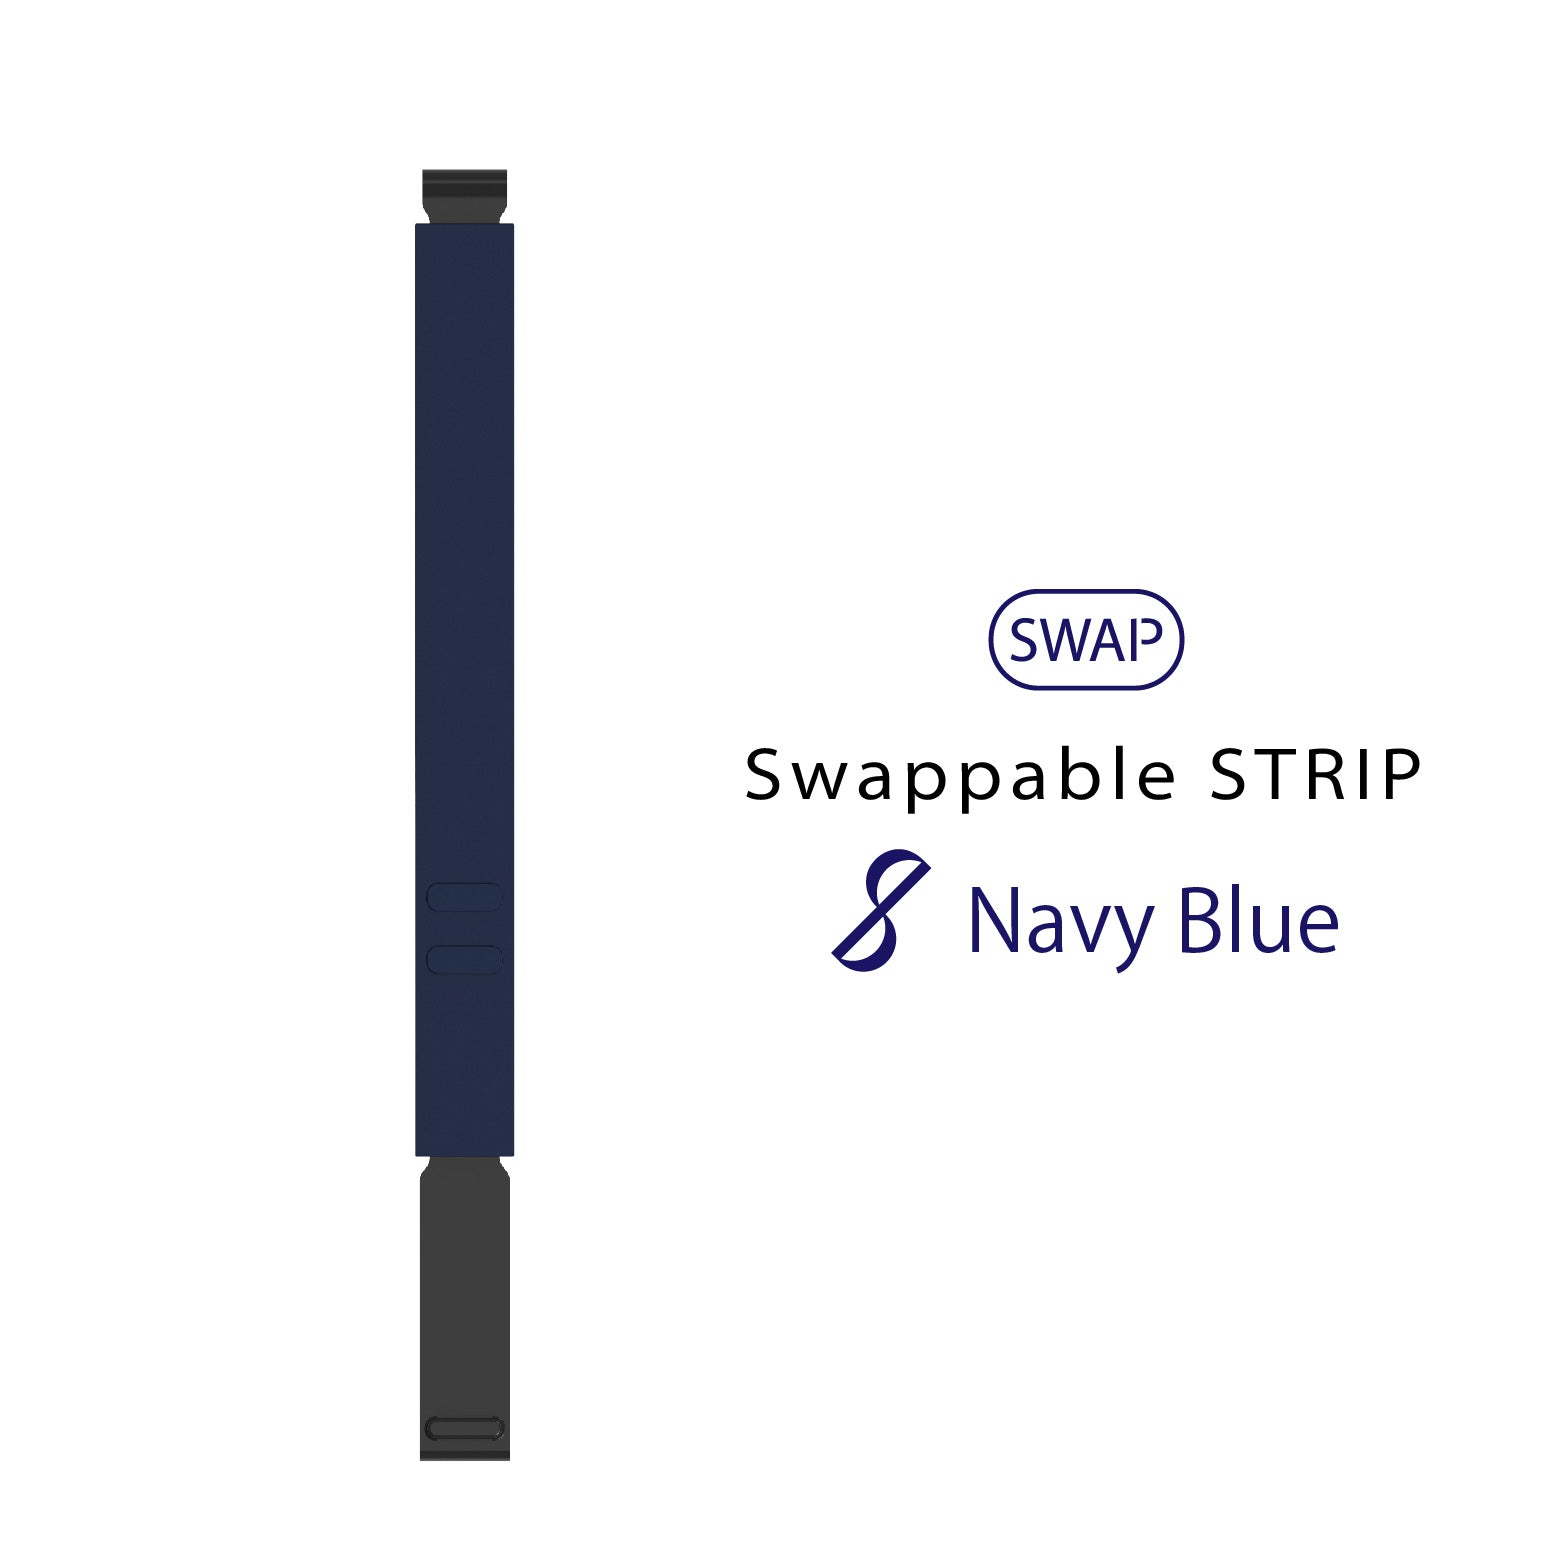 Swappable Strip: Navy Blue